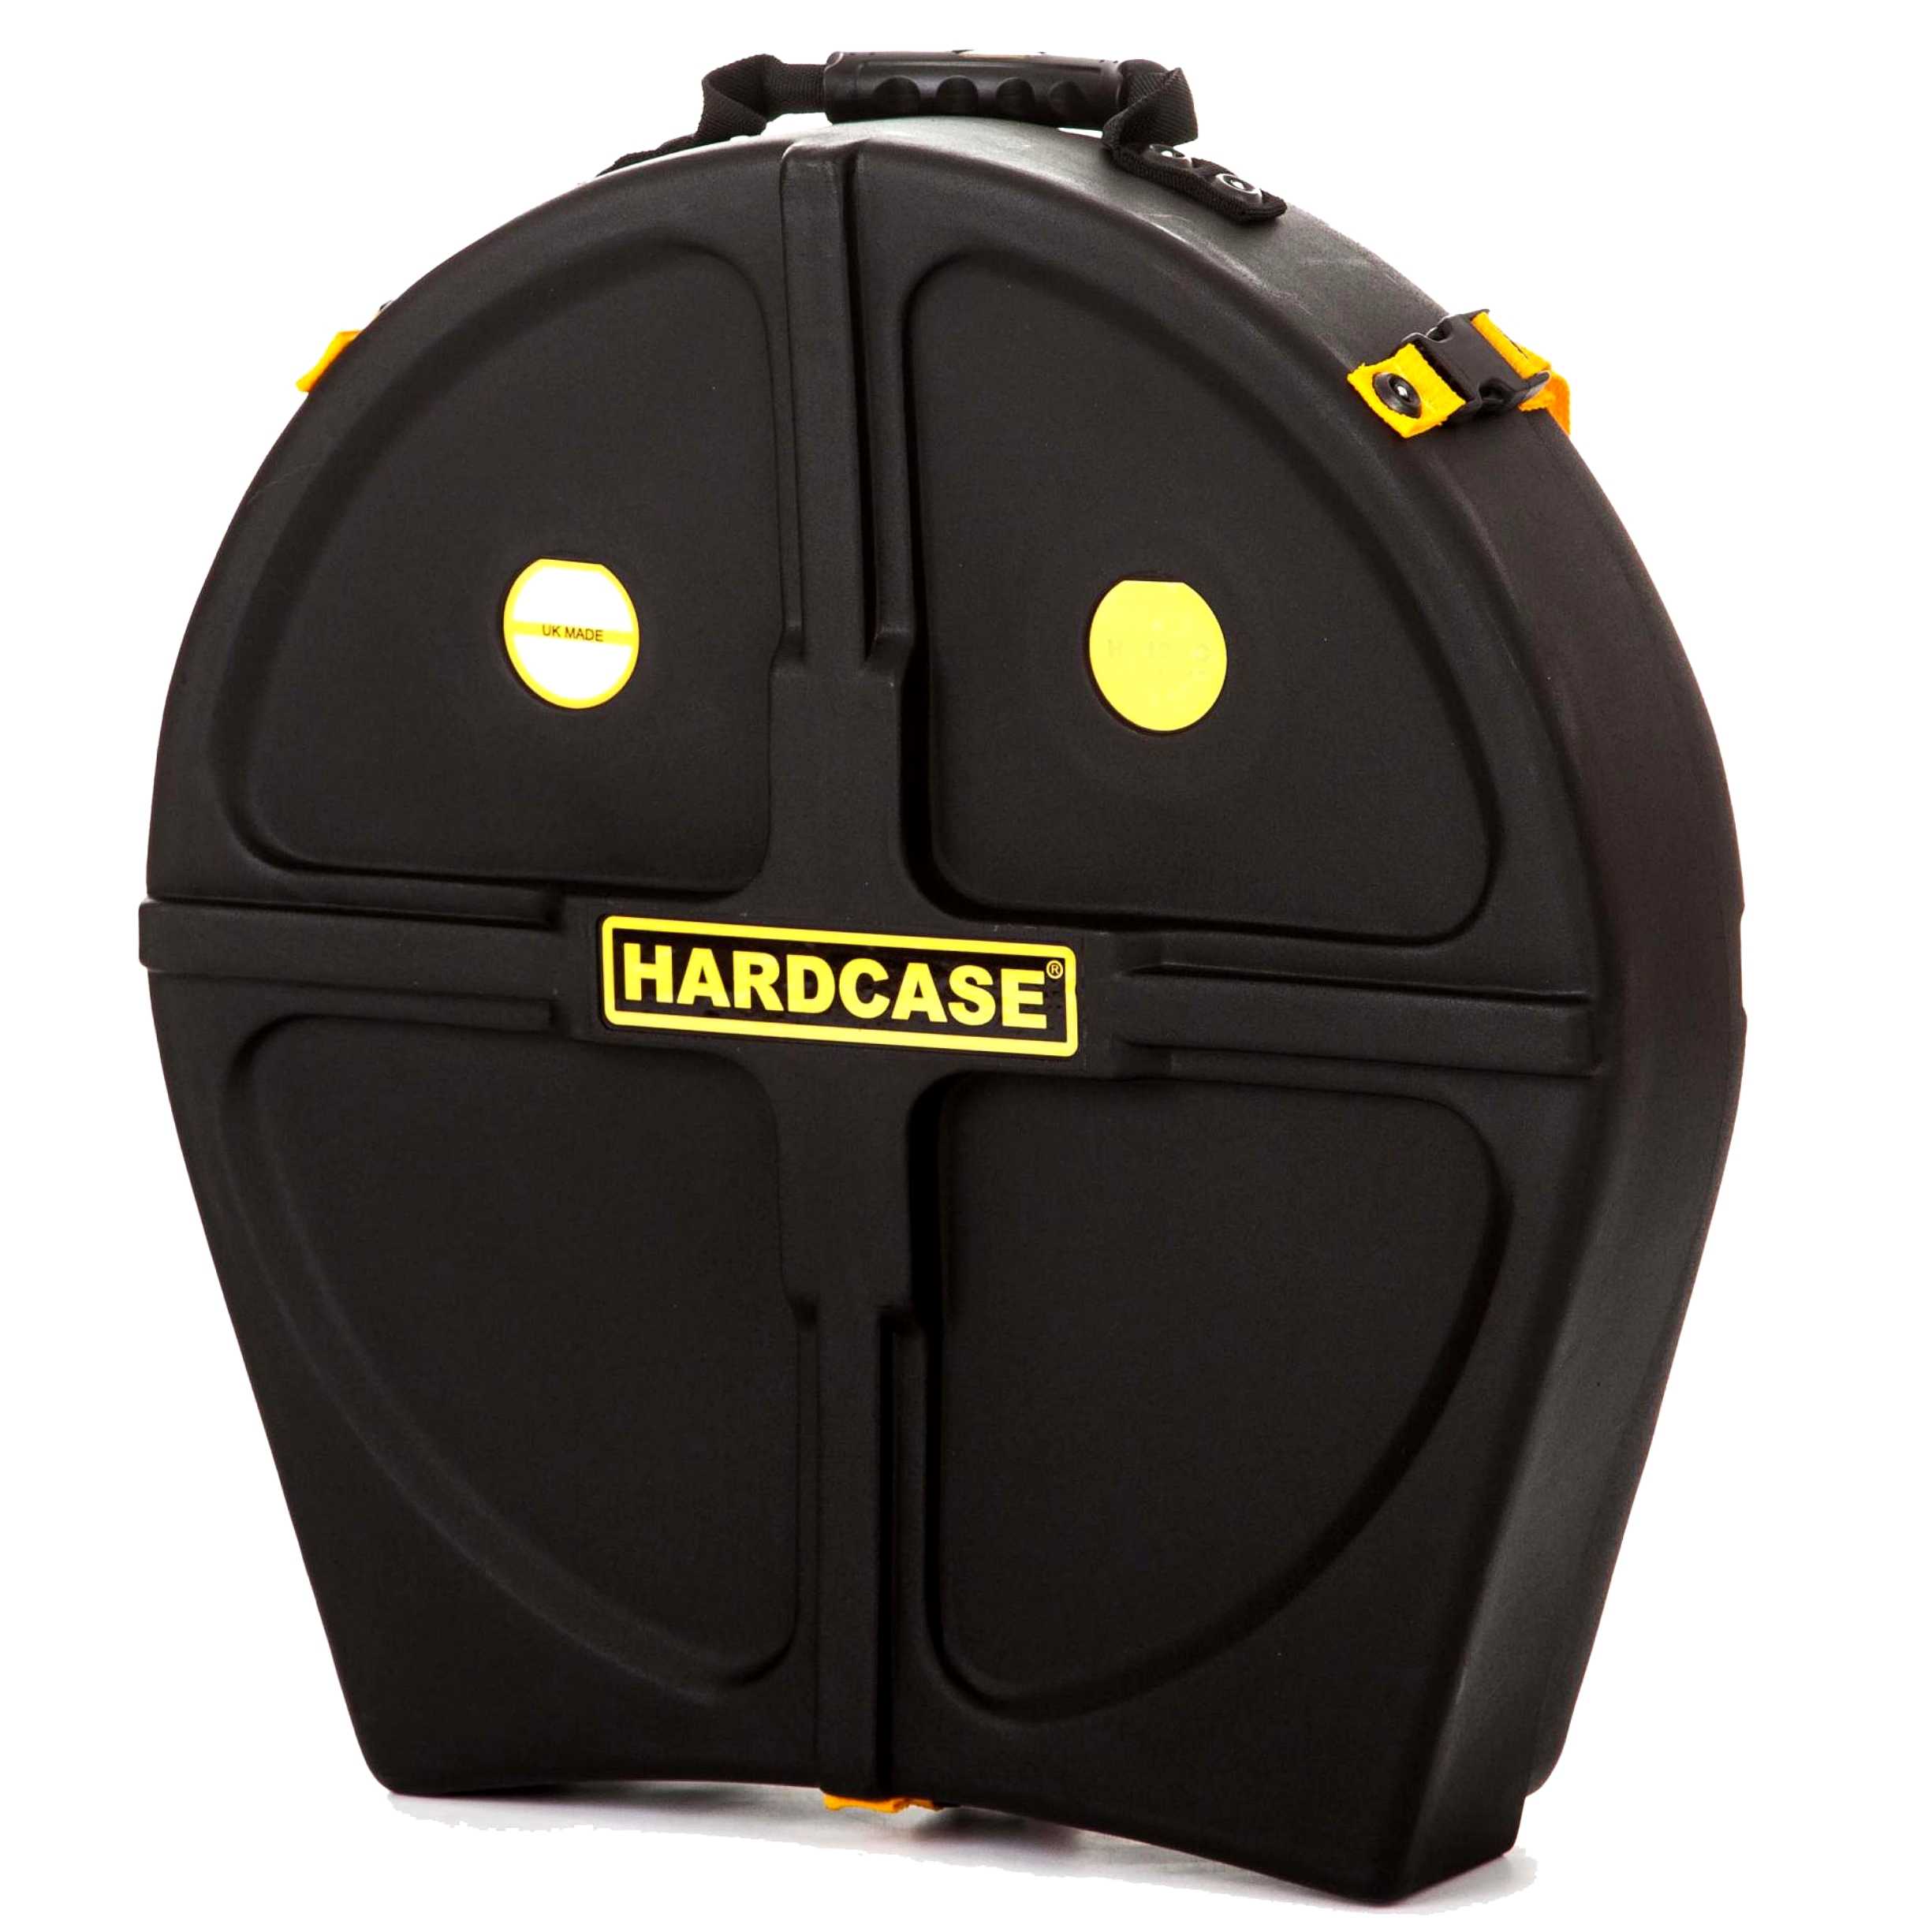 Hardcase Marching Cymbal Case 22" Pair